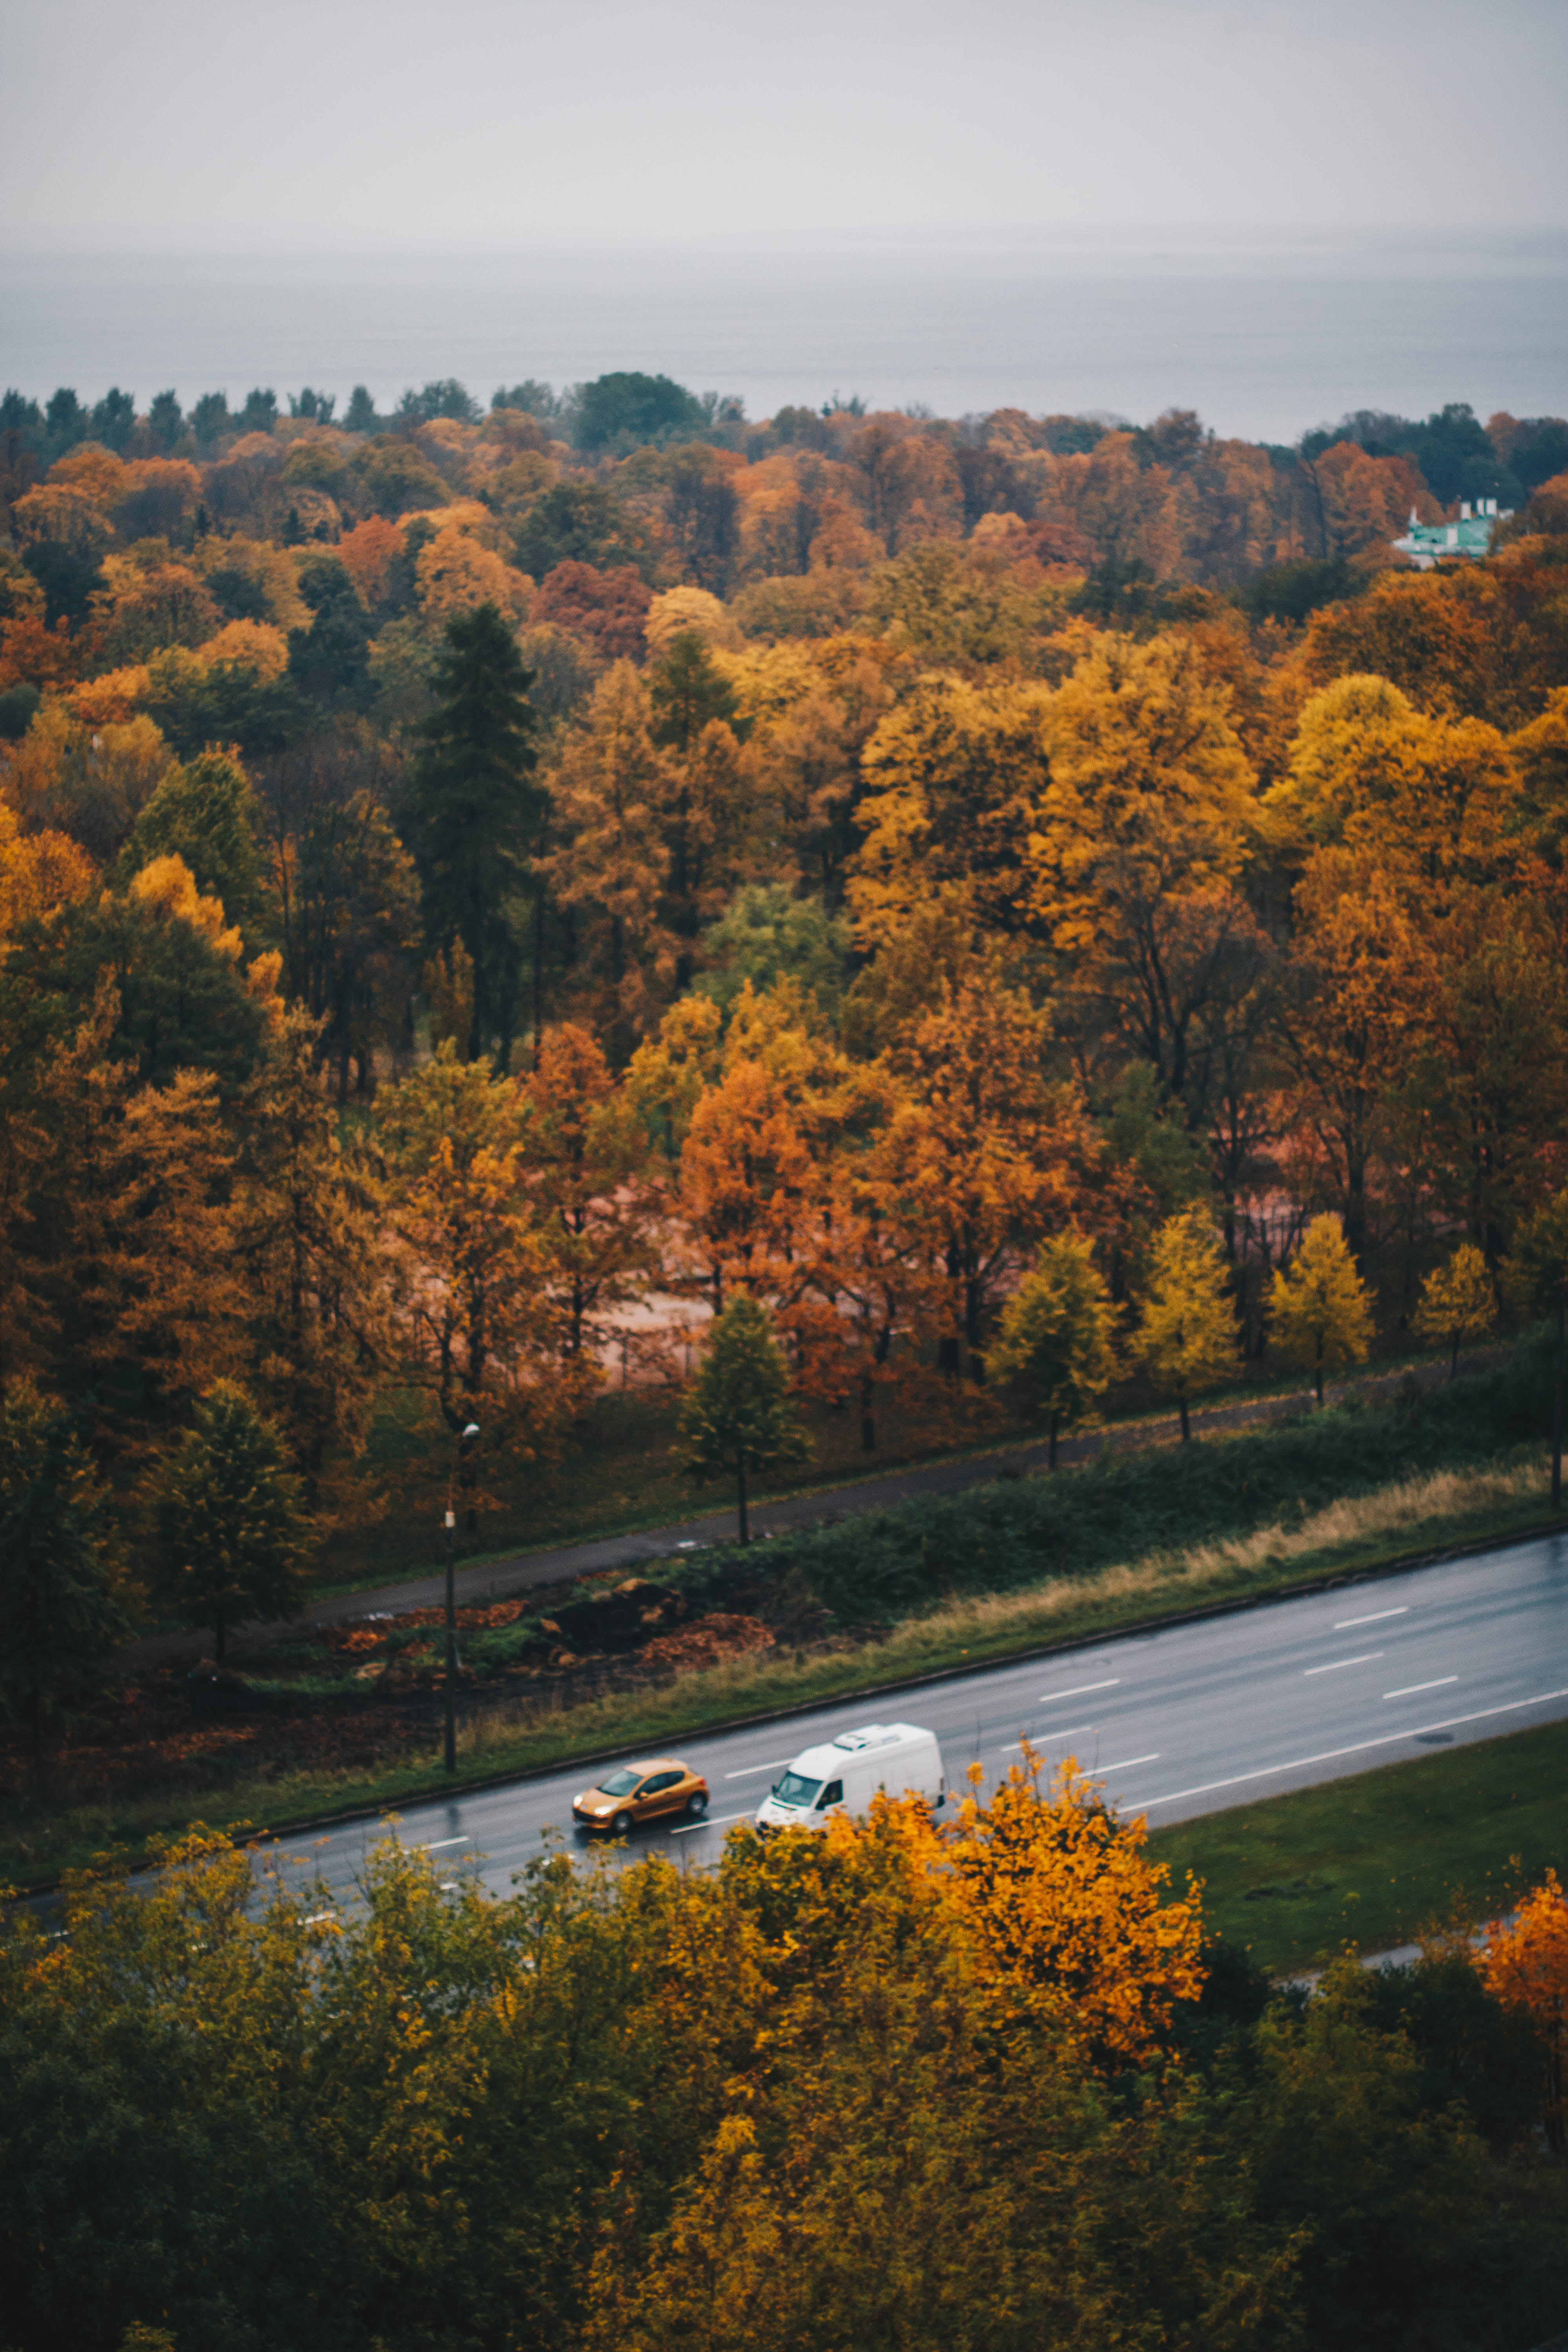 Overview of brown leaf trees and road photo